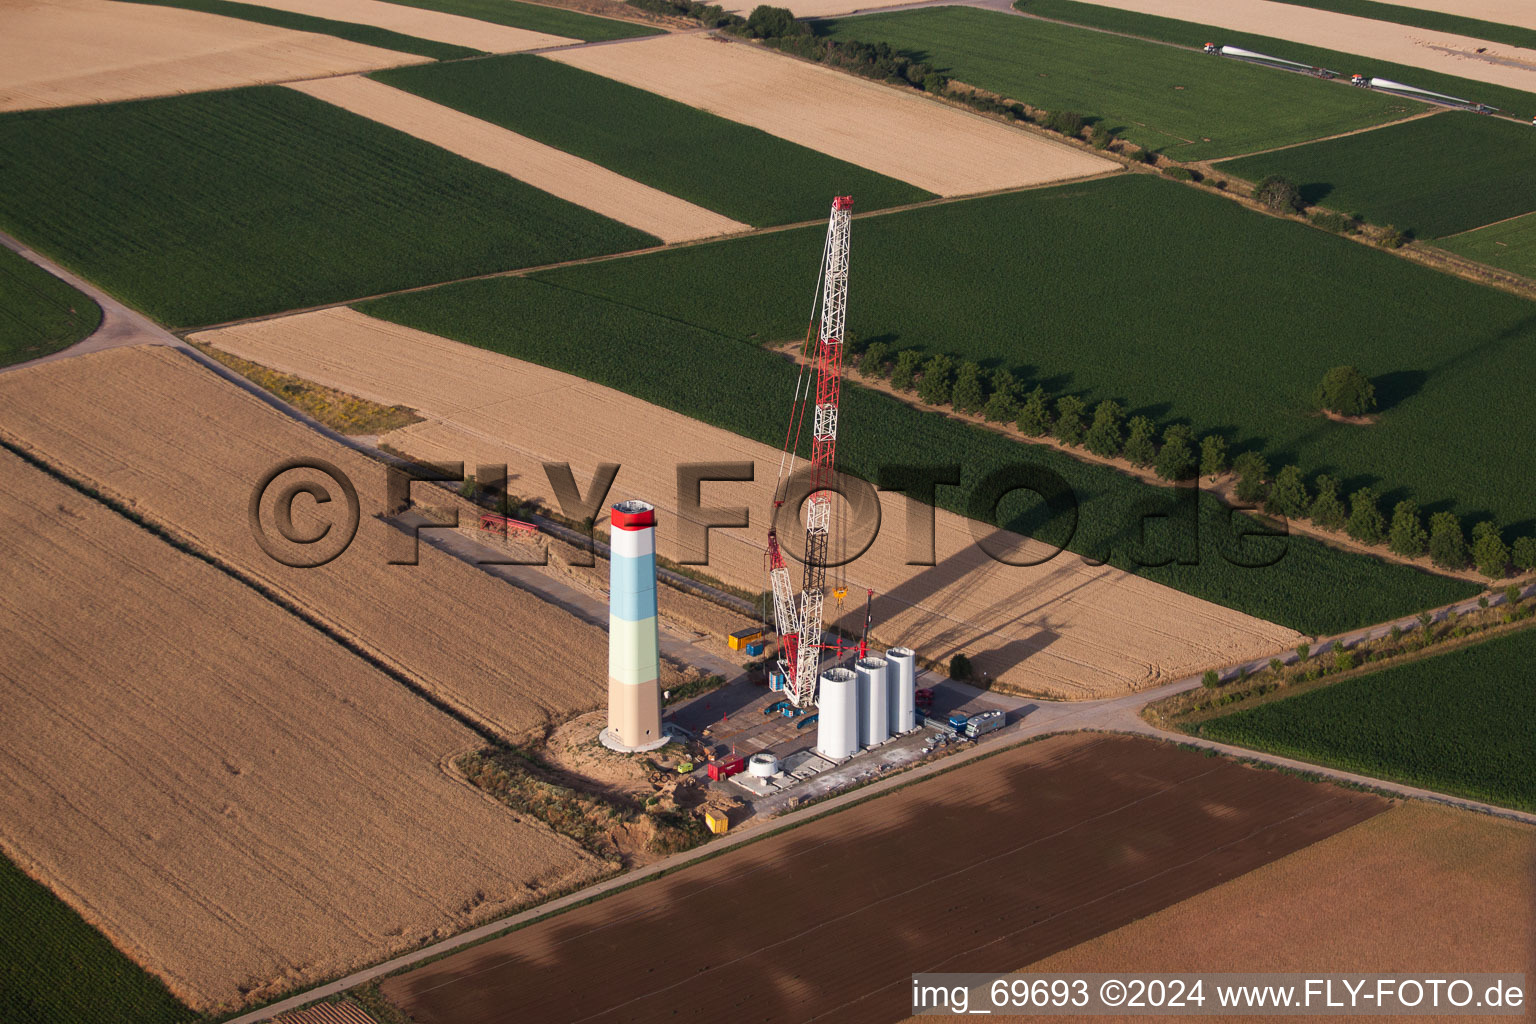 Bird's eye view of Wind farm construction in Offenbach an der Queich in the state Rhineland-Palatinate, Germany